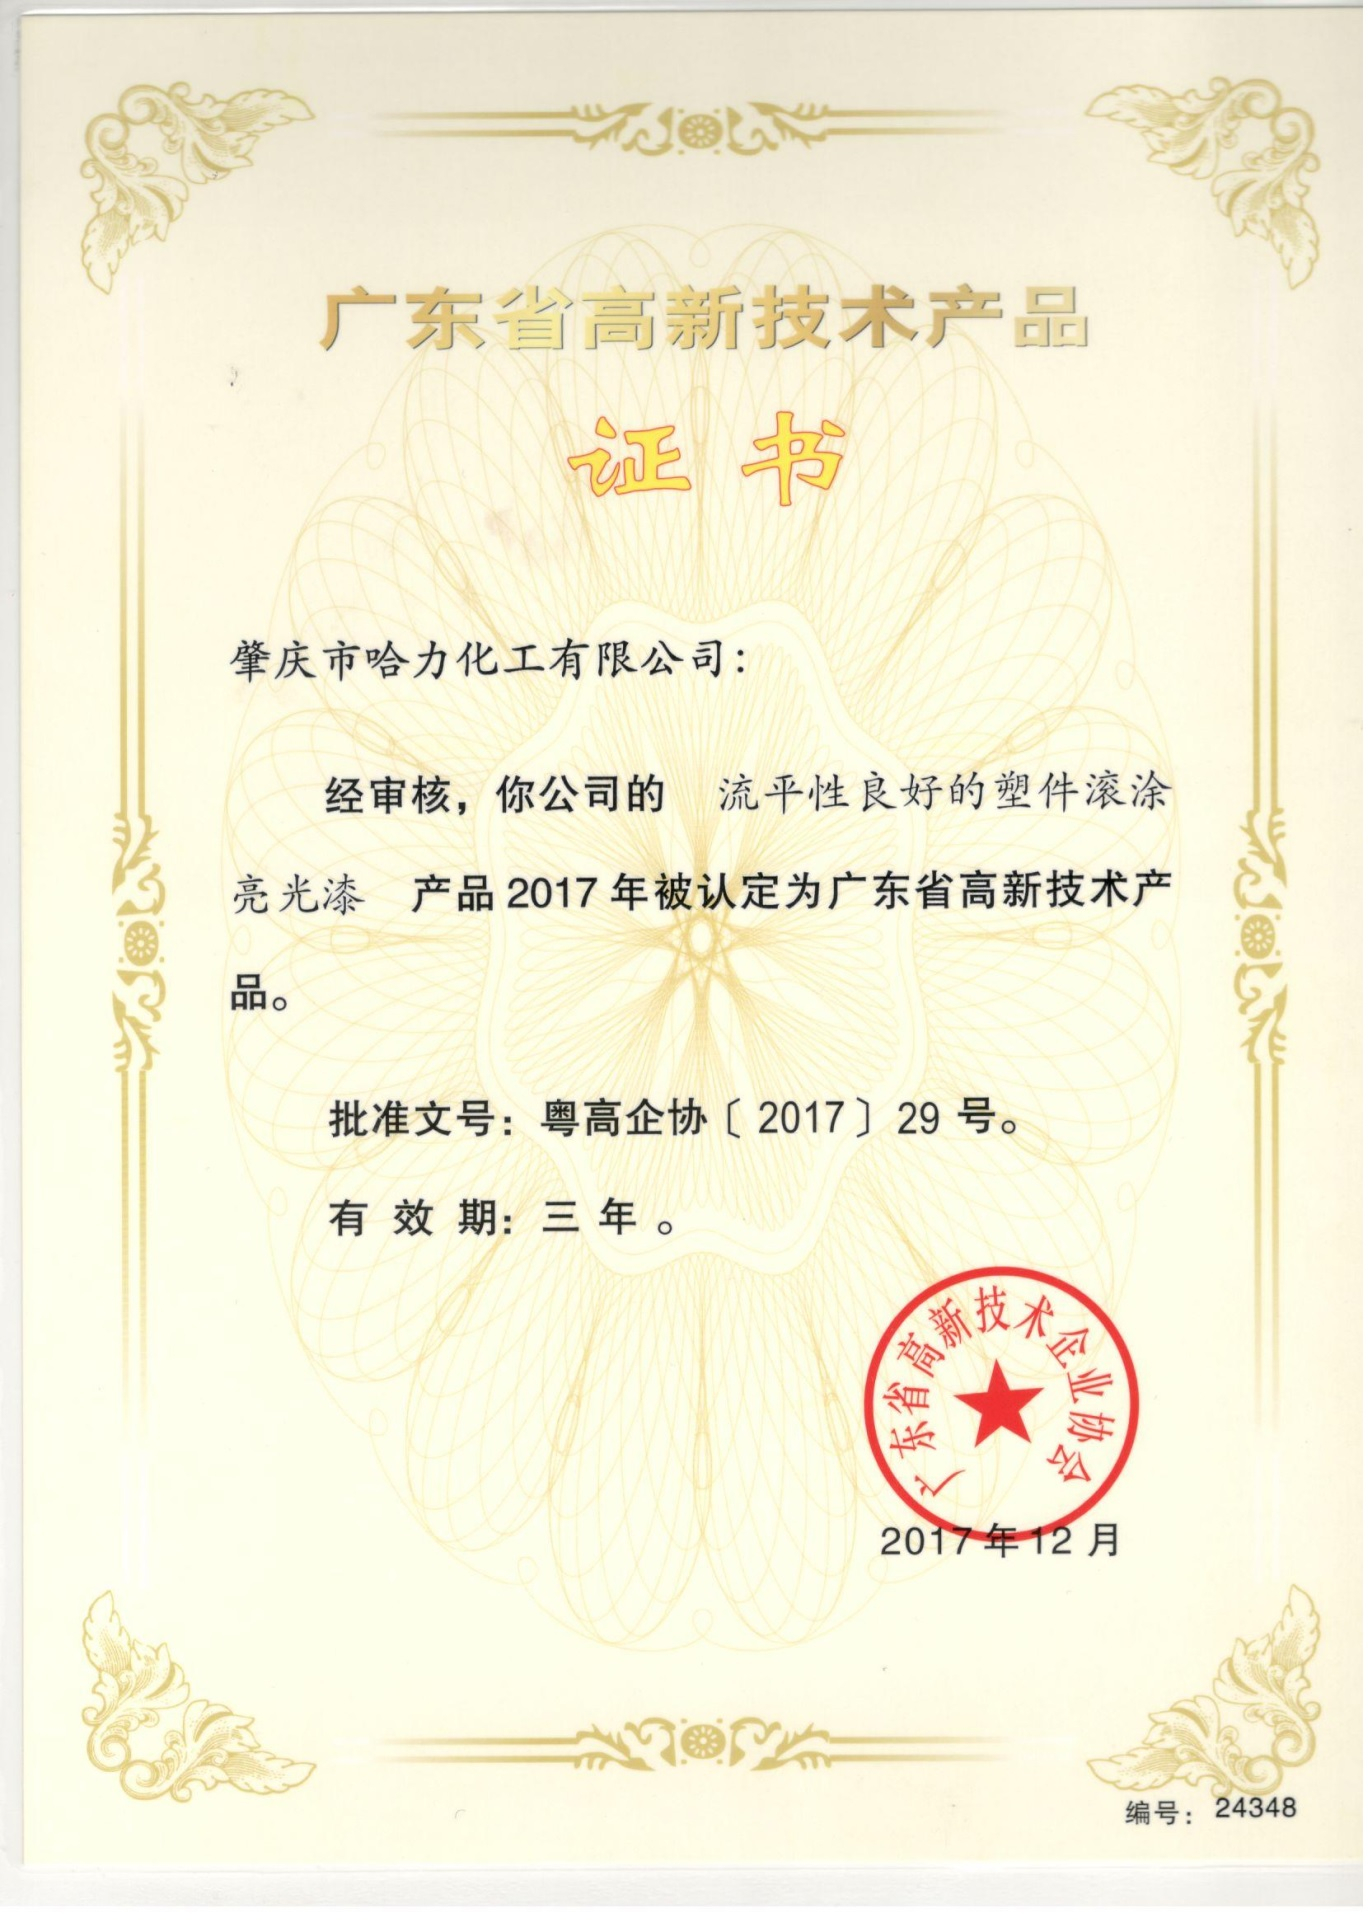 High-tech Product Certificate for Roller Coating Glossy Paint of Plastic With Good Levelling